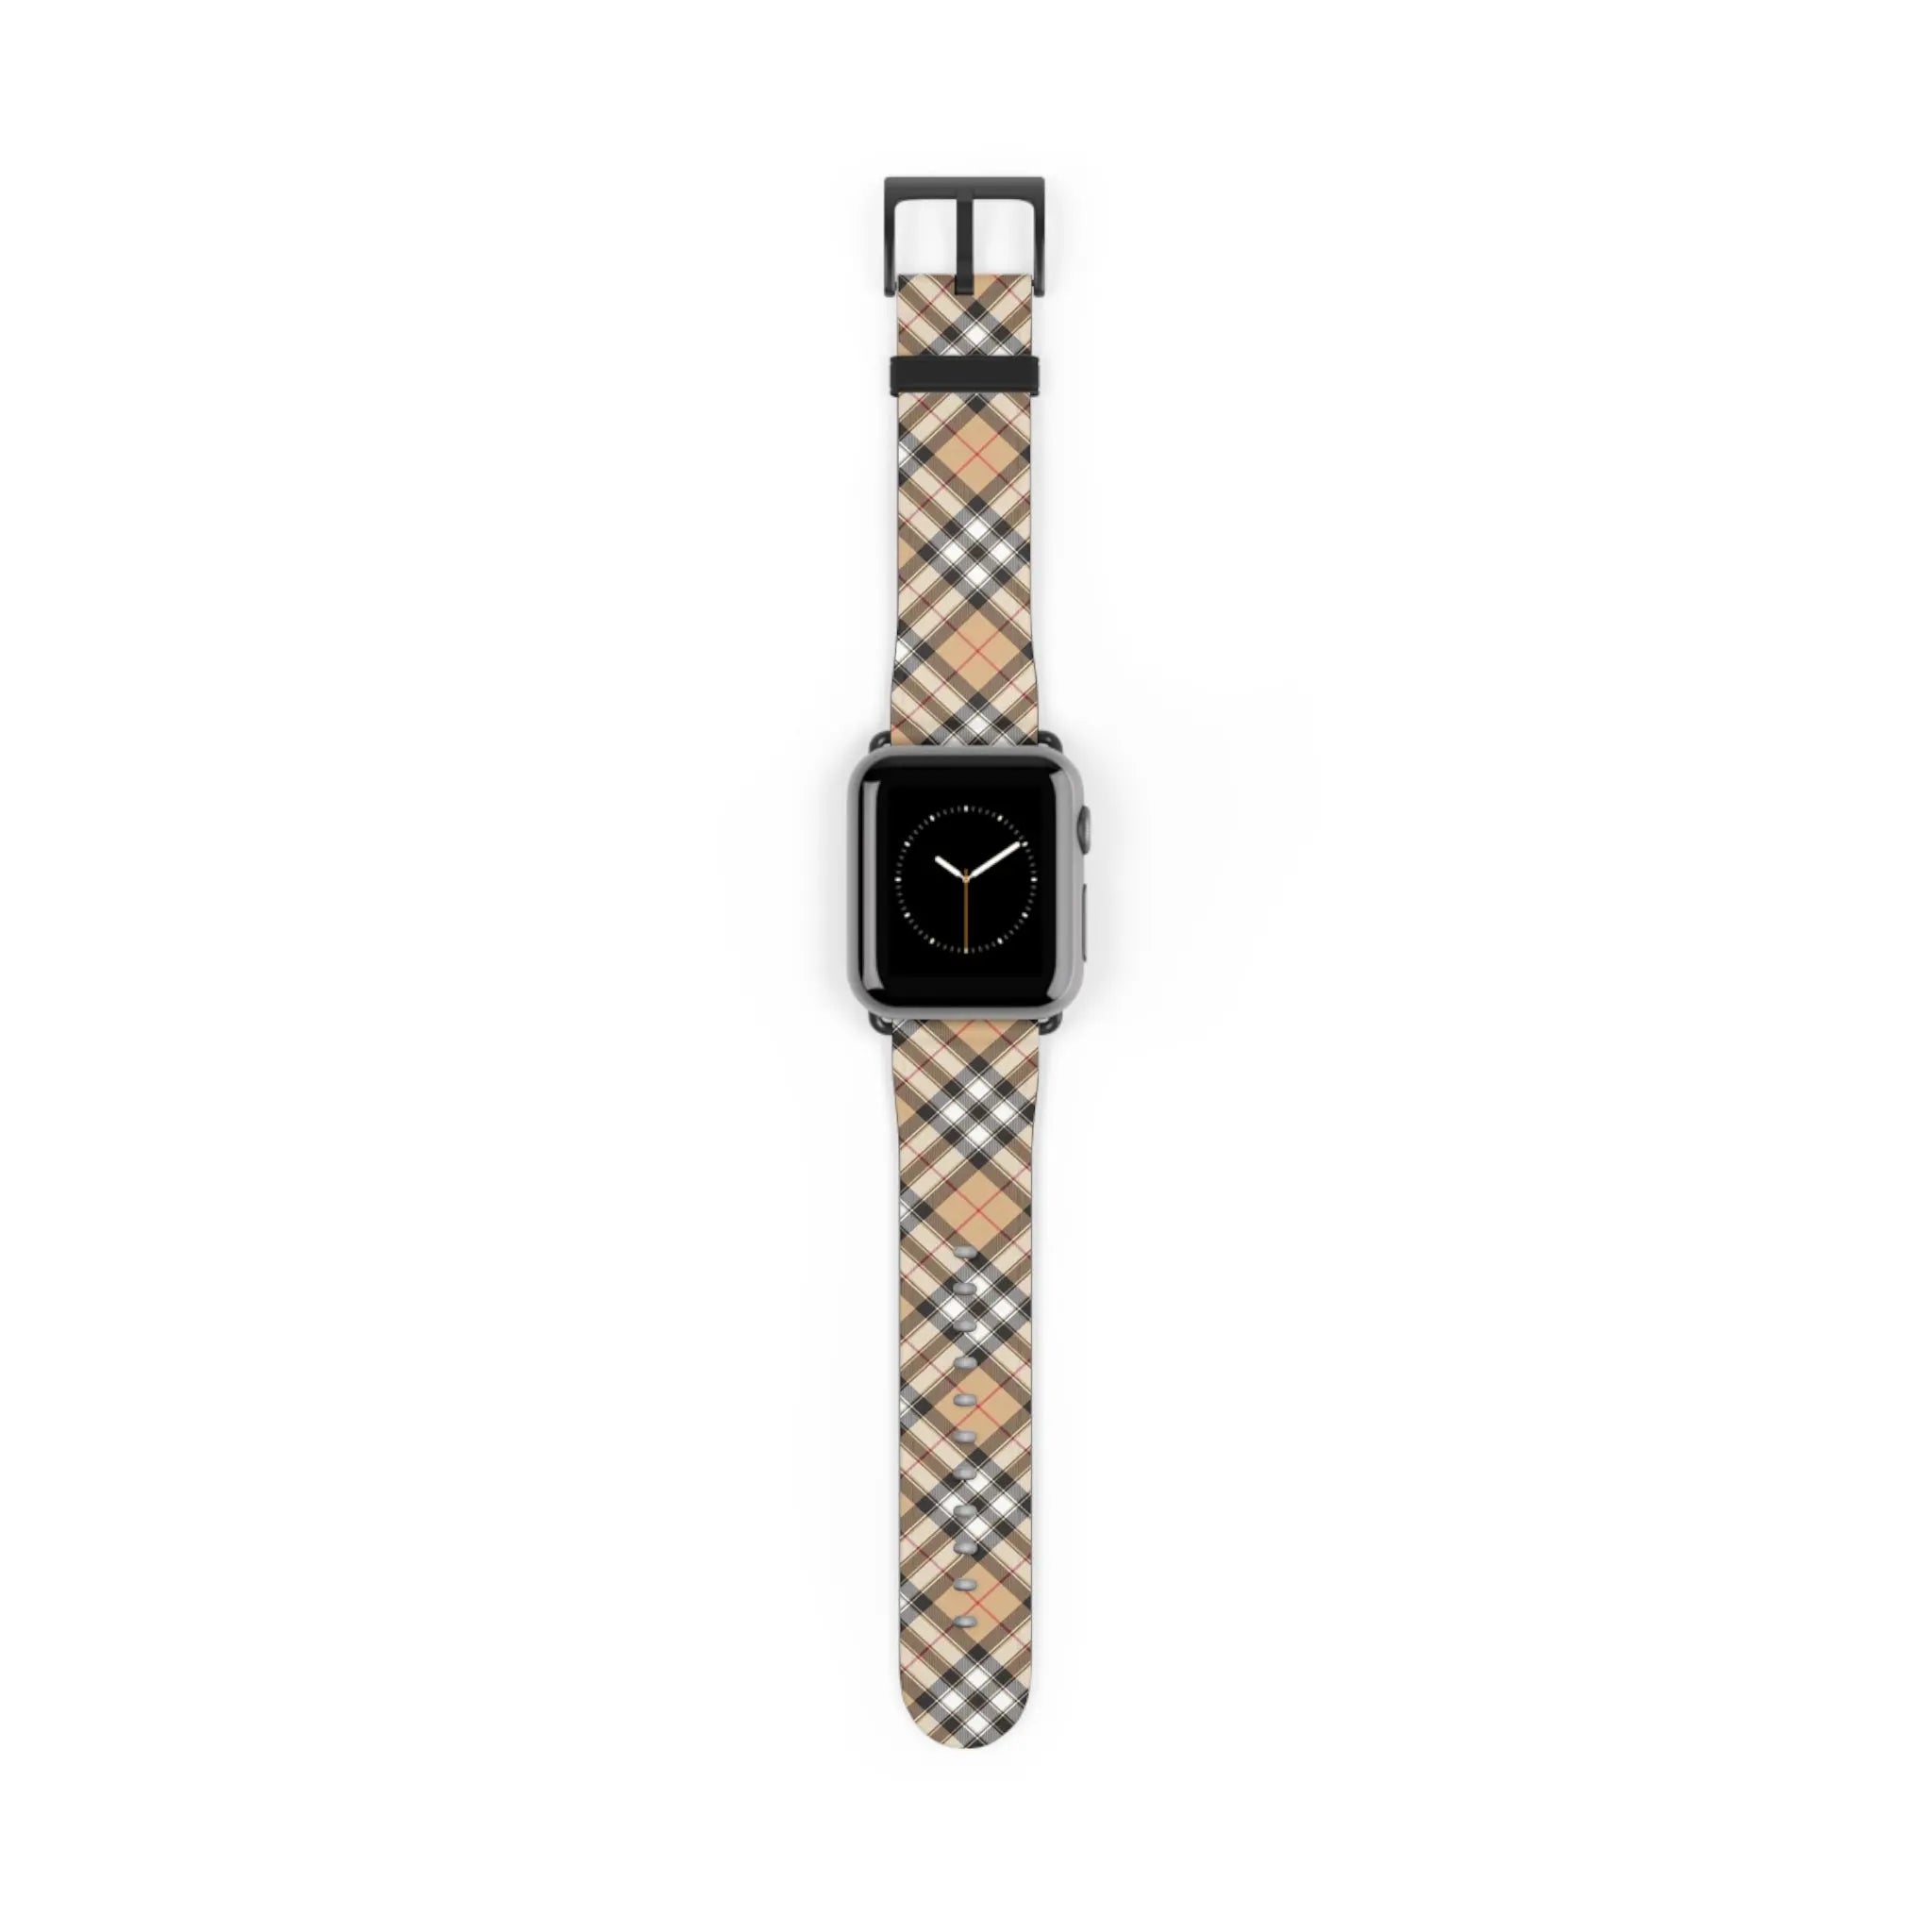  Copy of Casual Wear in Beige Plaid Watch Band for Apple Watch Accessories38-41mmBlackMatte